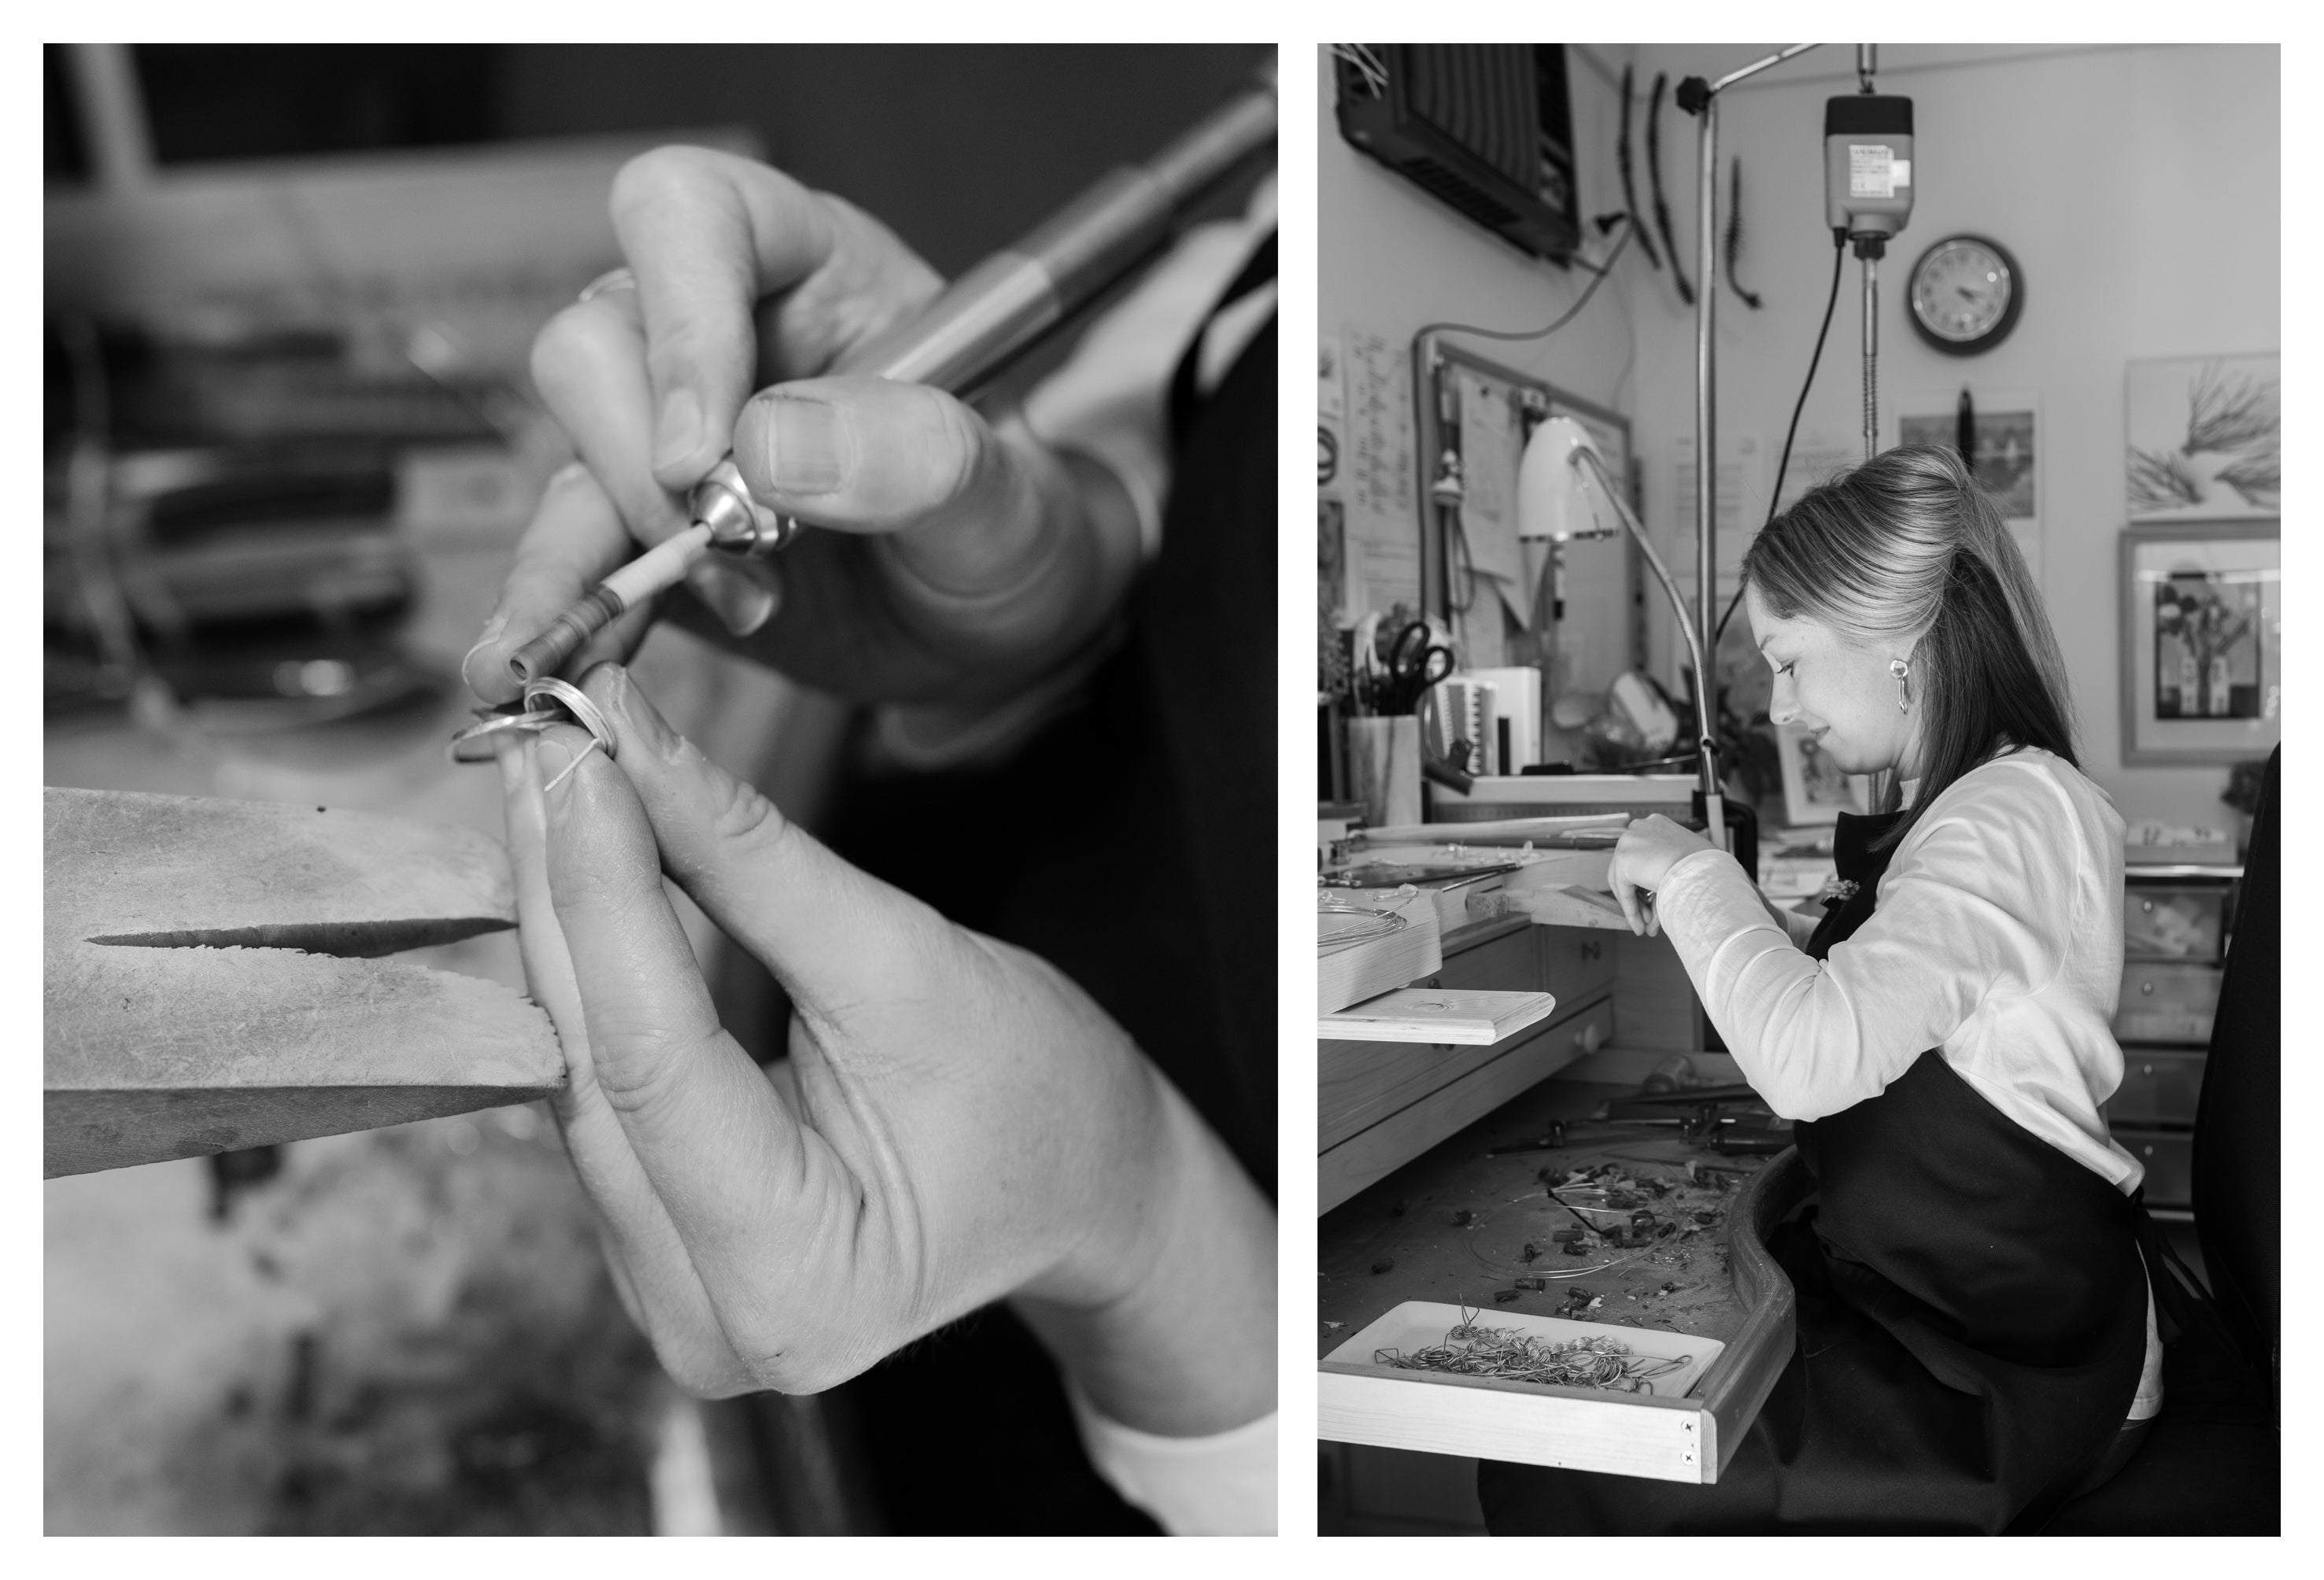 Melissa Gillespie at her jewellery bench handcrafting unique Contemporary Jewellery from Sterling Silver in Adelaide, South Australia